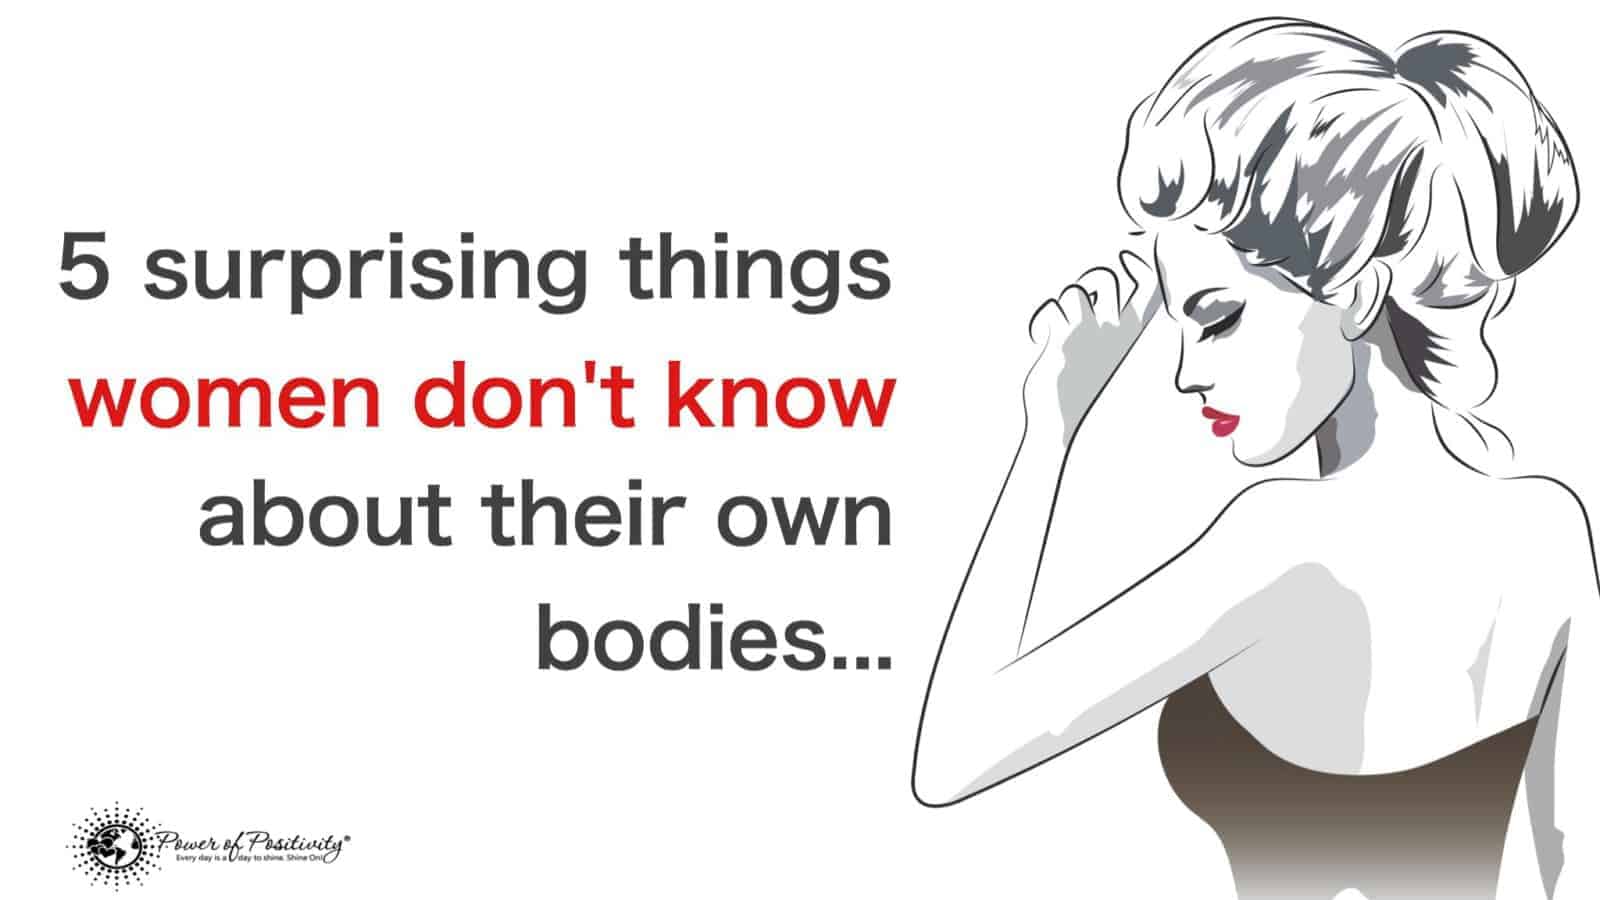 5 Surprising Things Women Don’t Know About Their Own Bodies